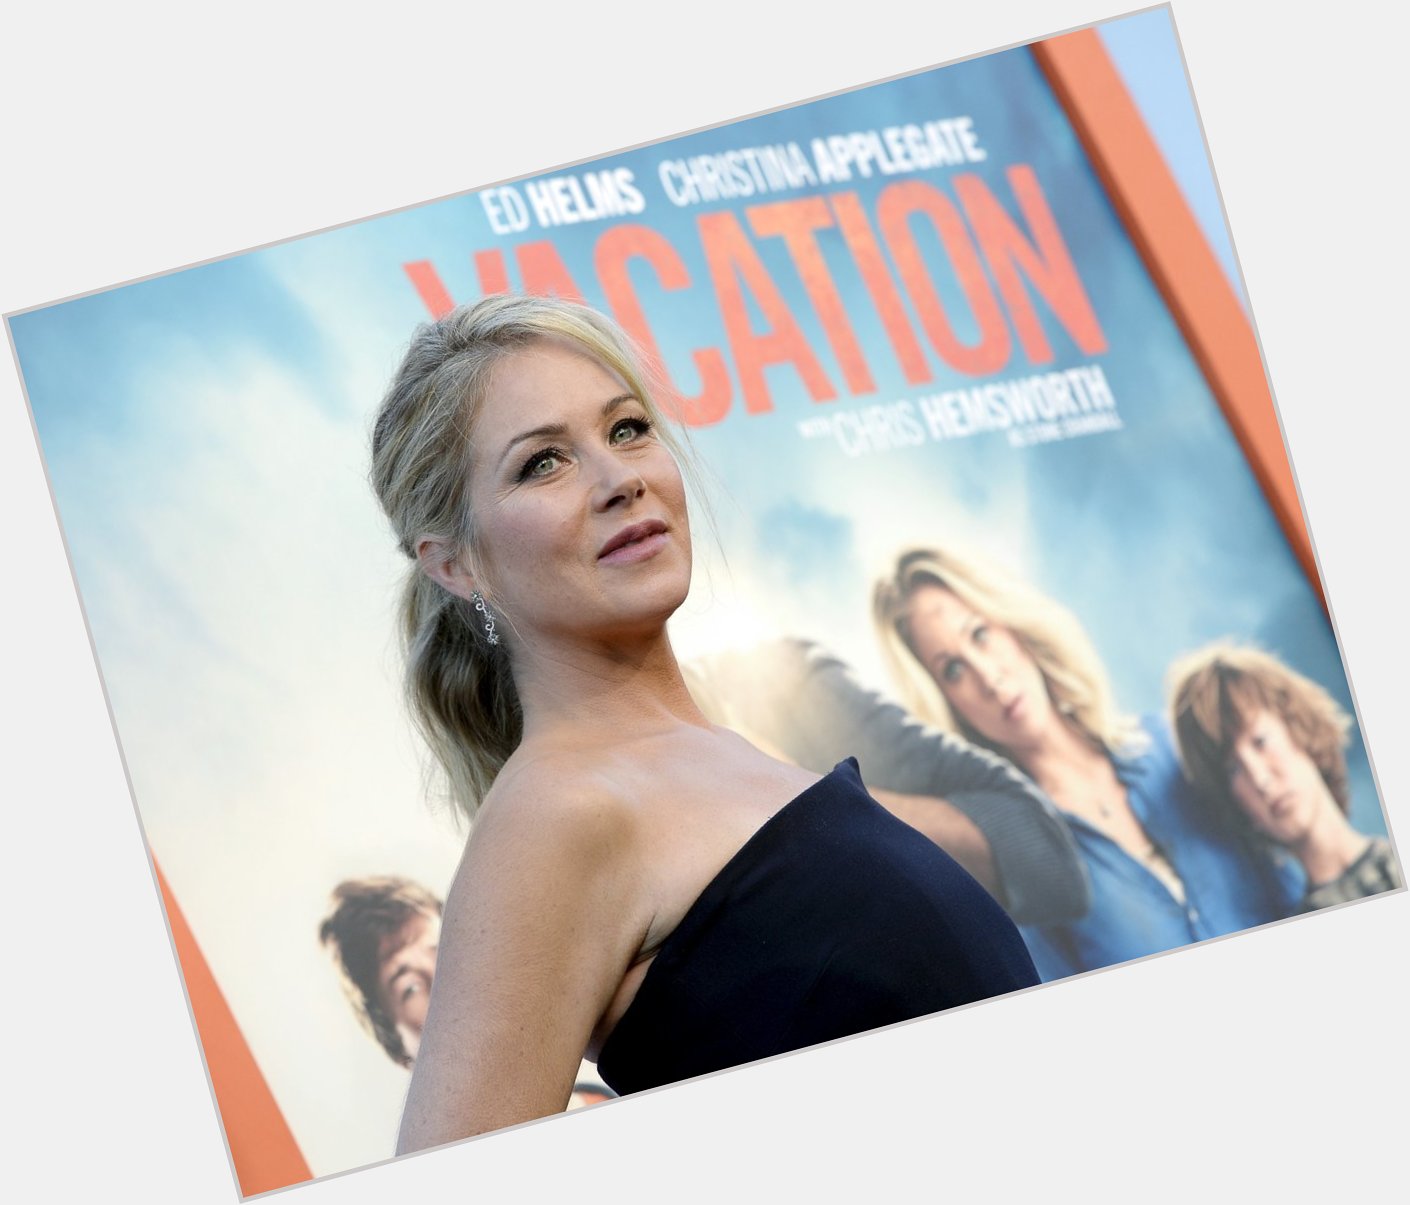 Huge happy birthday shoutout to Christina Applegate! (Reuters) 